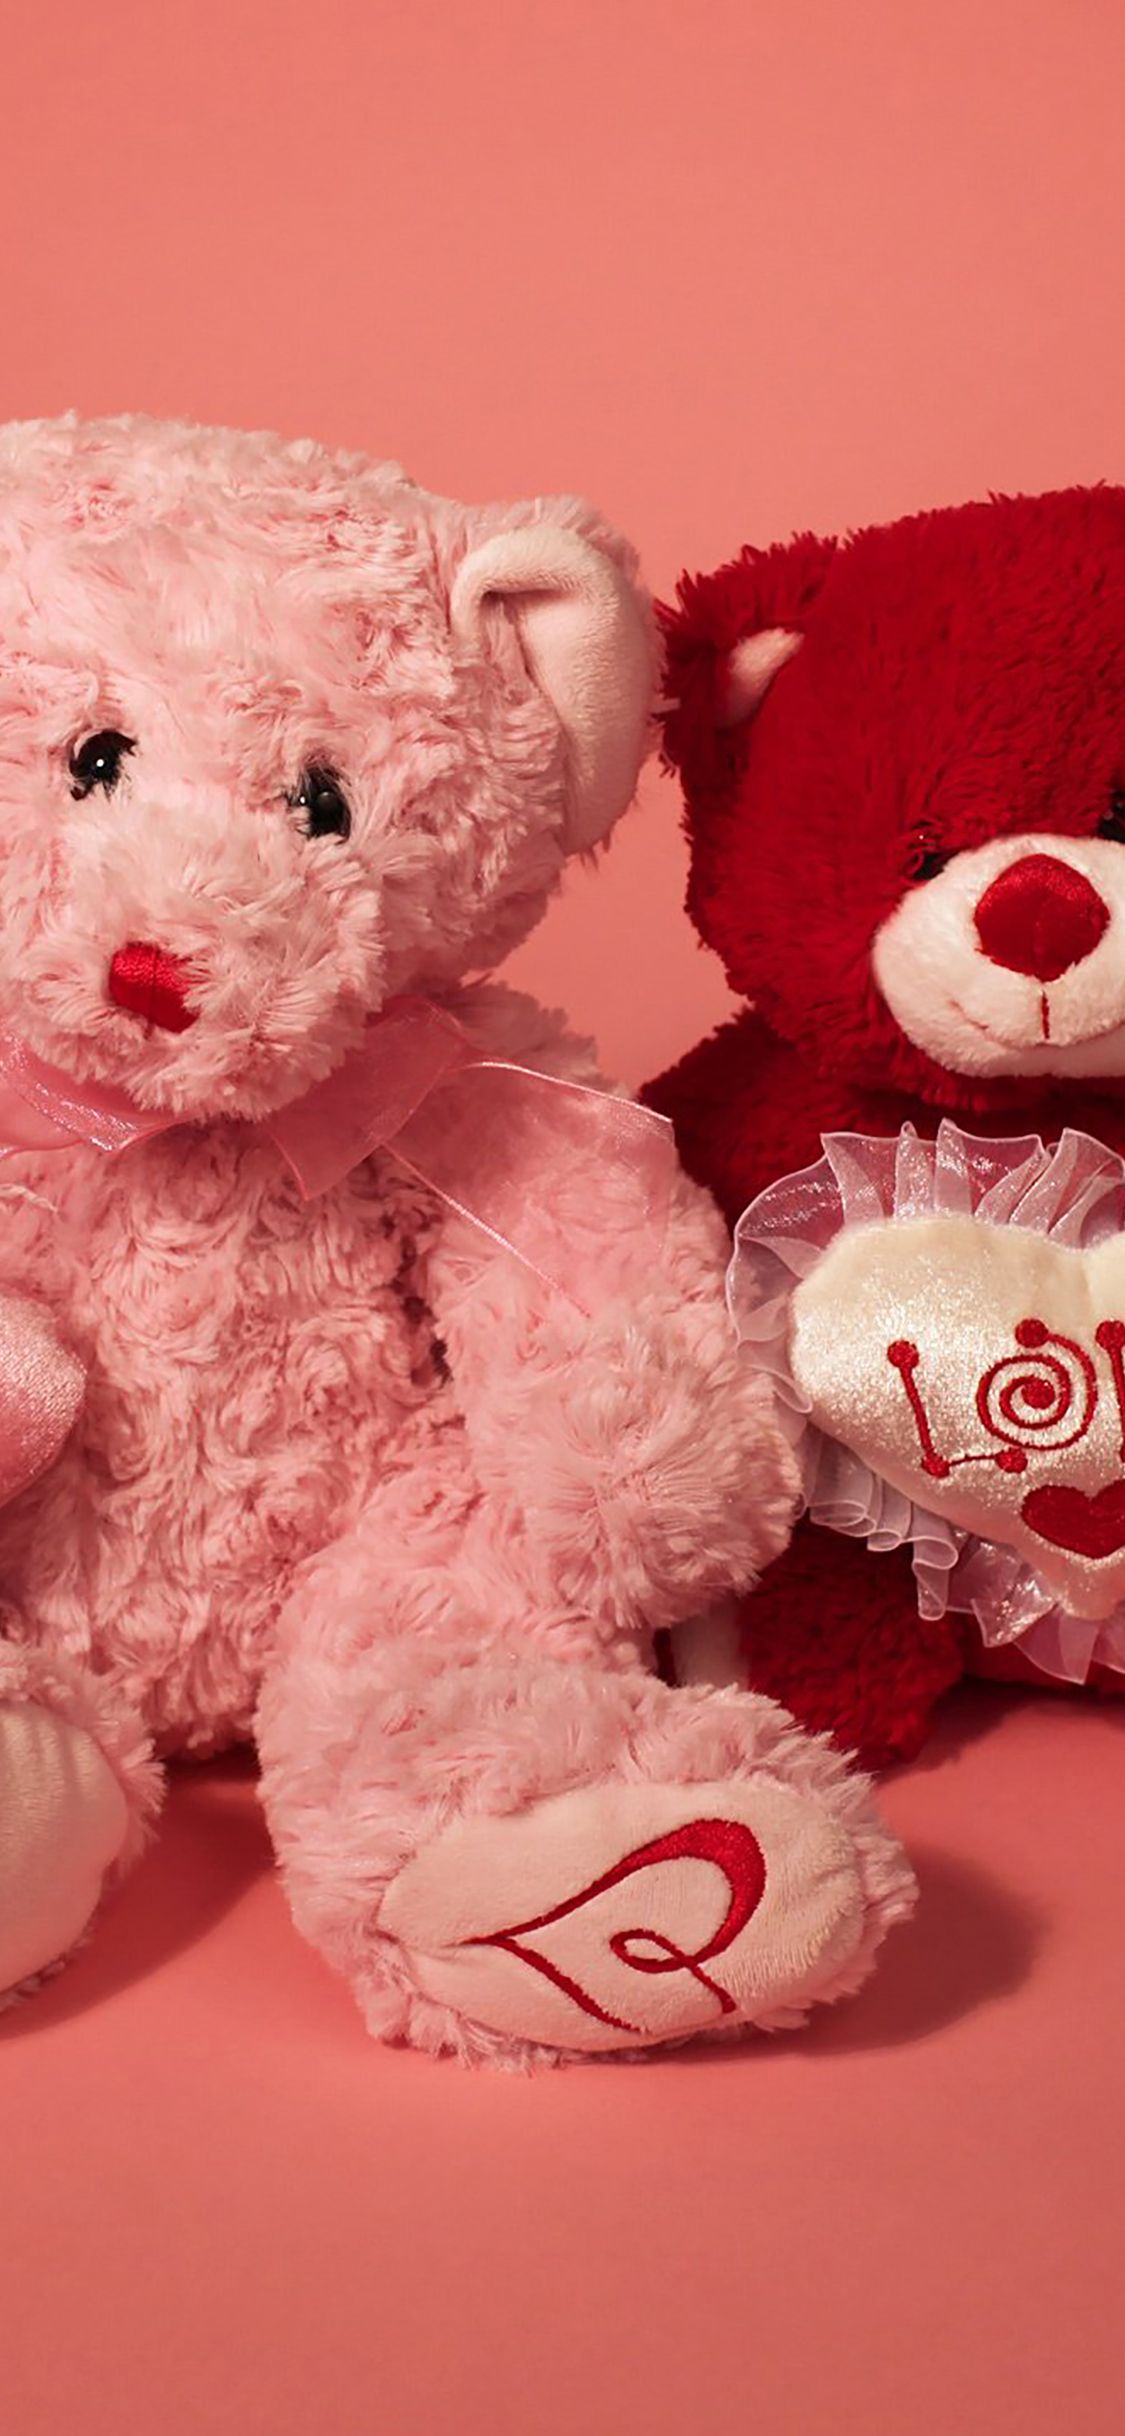 A couple of teddy bears sitting next to each other - Valentine's Day